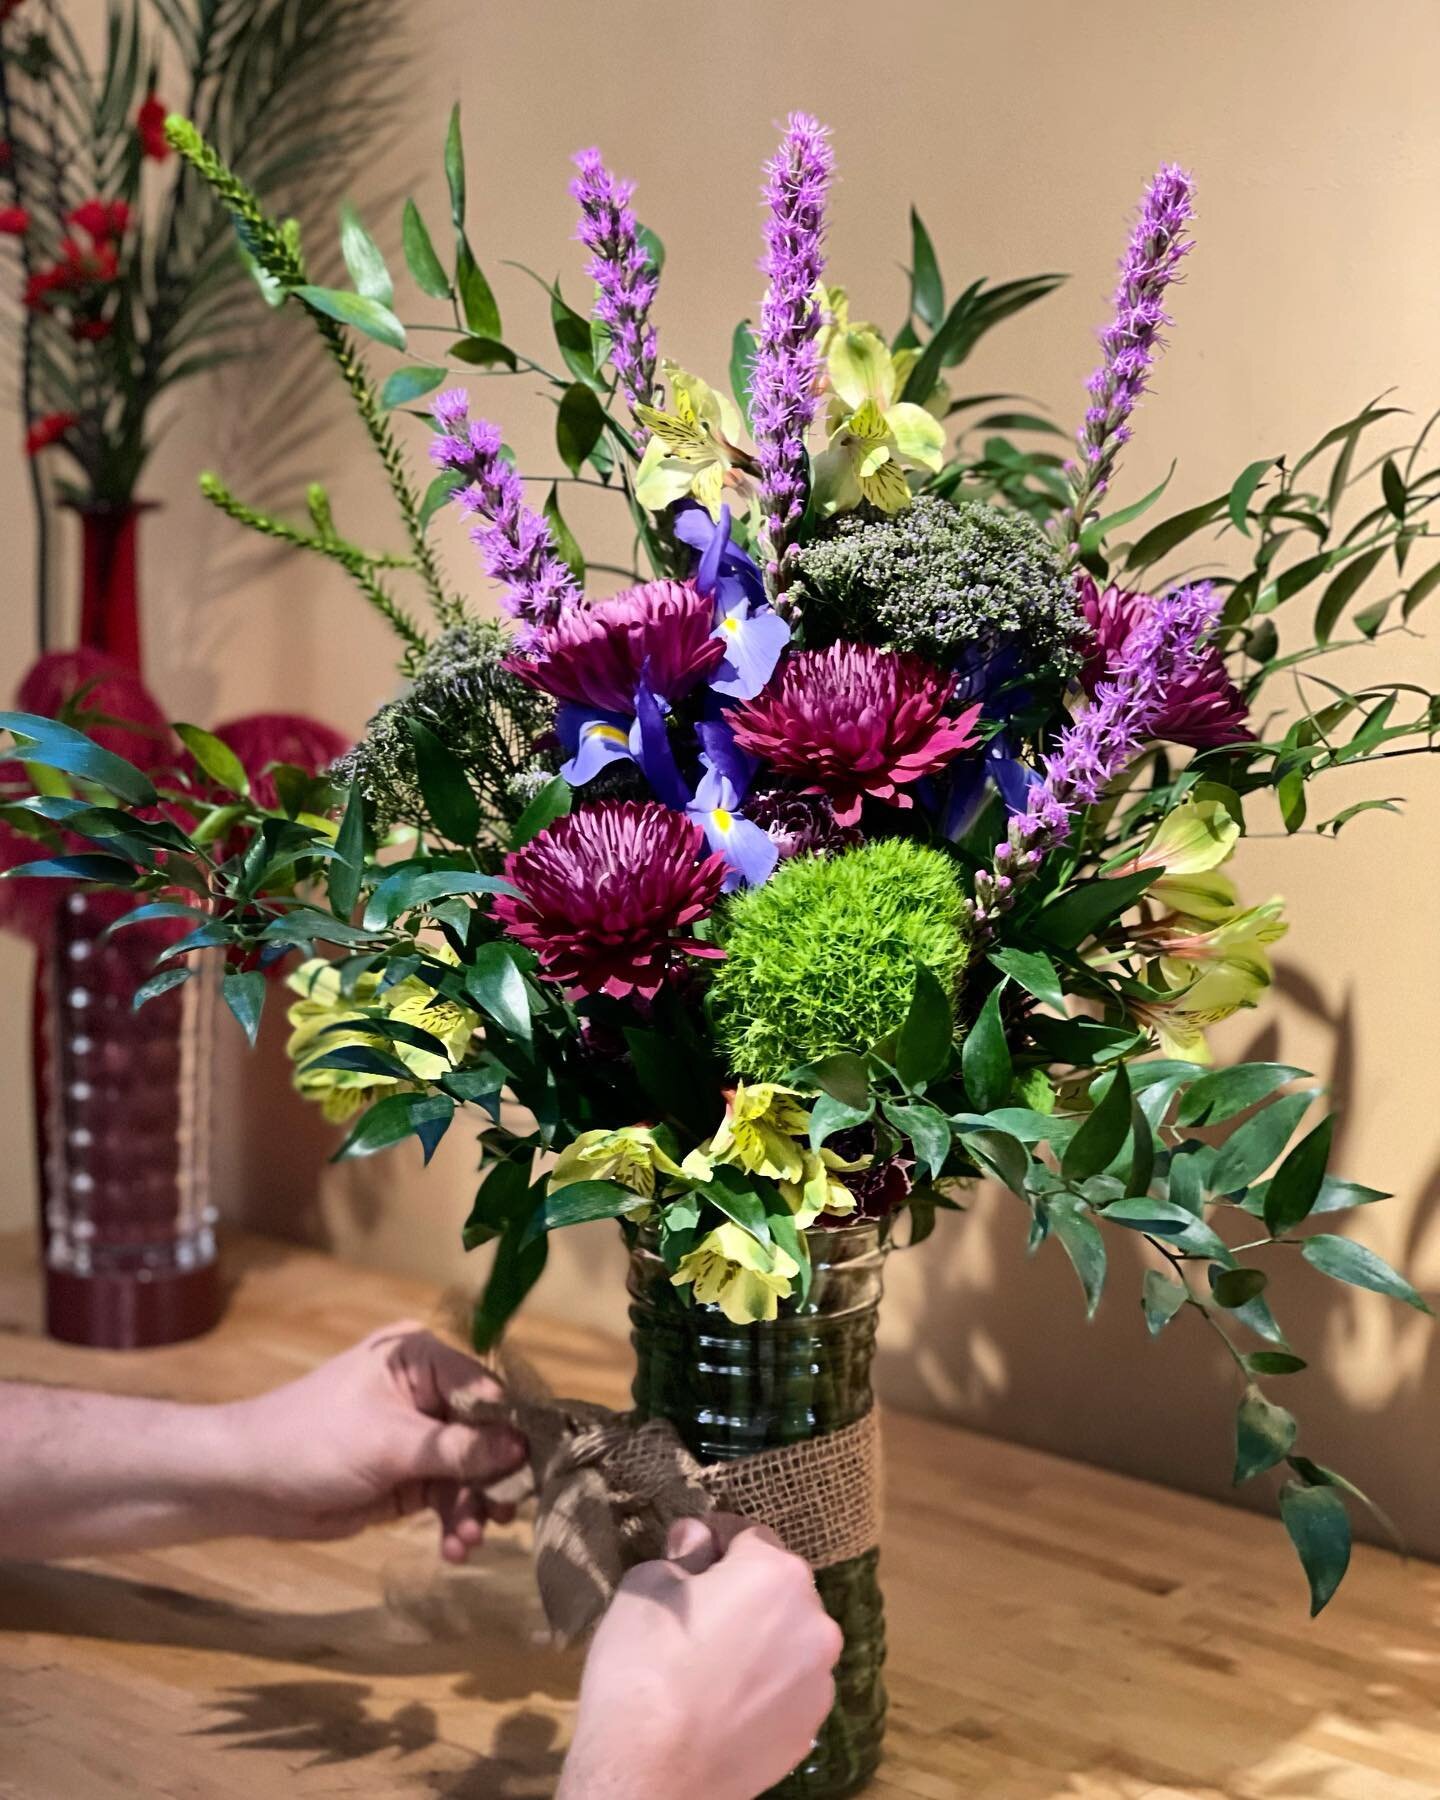 Mother&rsquo;s Day will be here before you know it! Pre-order your flowers with Fiddleleaf Florals. DM or visit fiddleleafflorals.com to place an order. 

#mothersday #freshcutflowers #floraldesign #arrangement #ribbon #flowers #ordertoday #delivery 